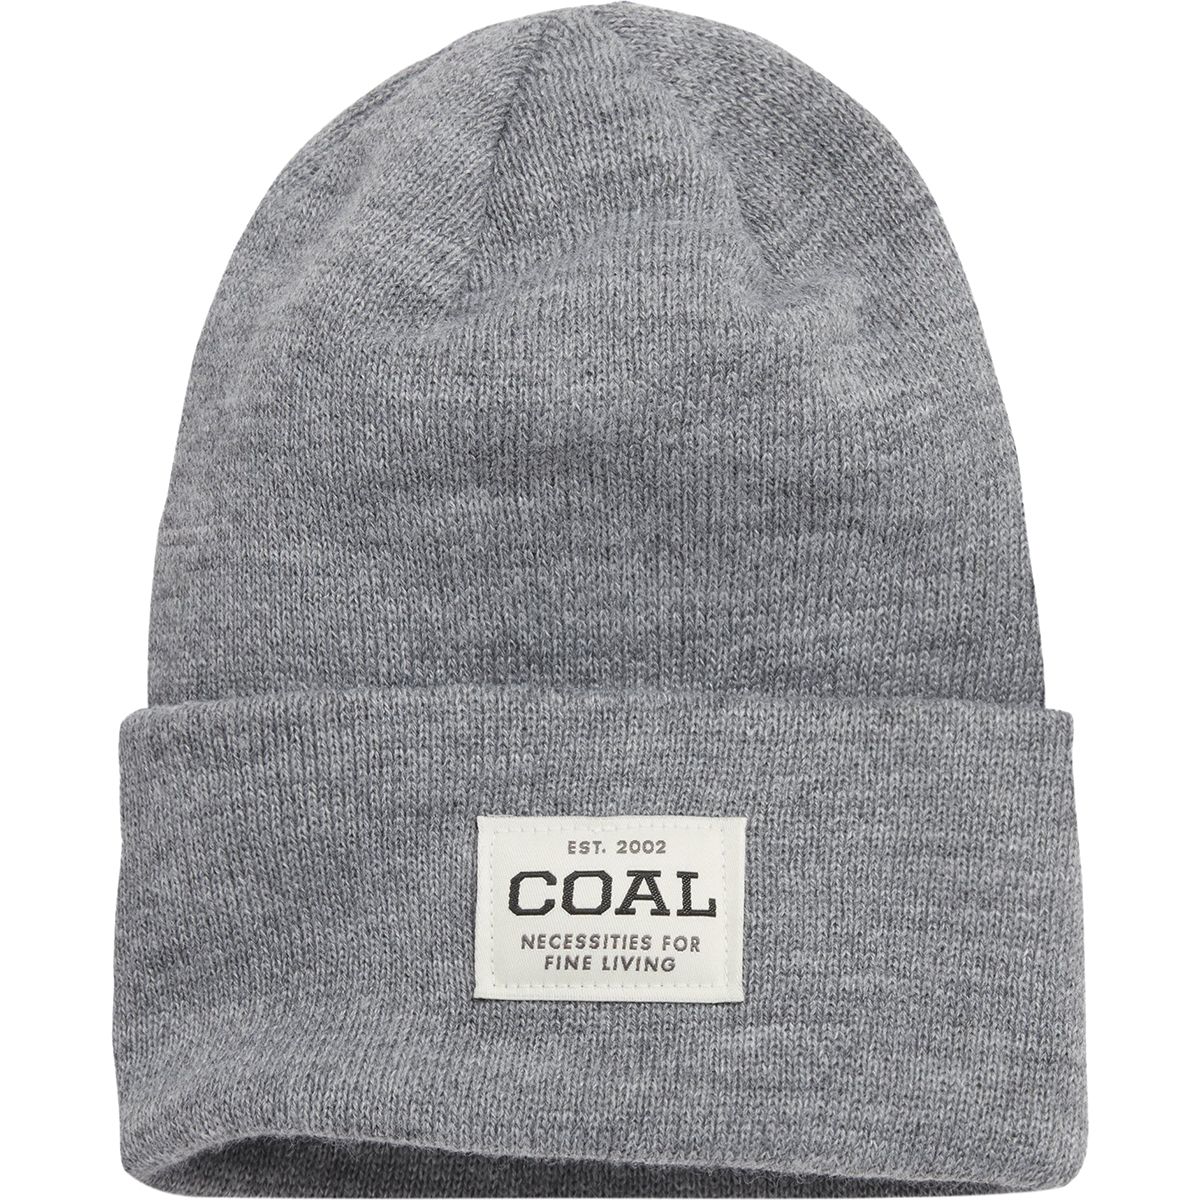 Details about   Coal Headwear THE DOWNHILL Unisex 100% Acrylic Cuffed Pom Beanie Choose Color 